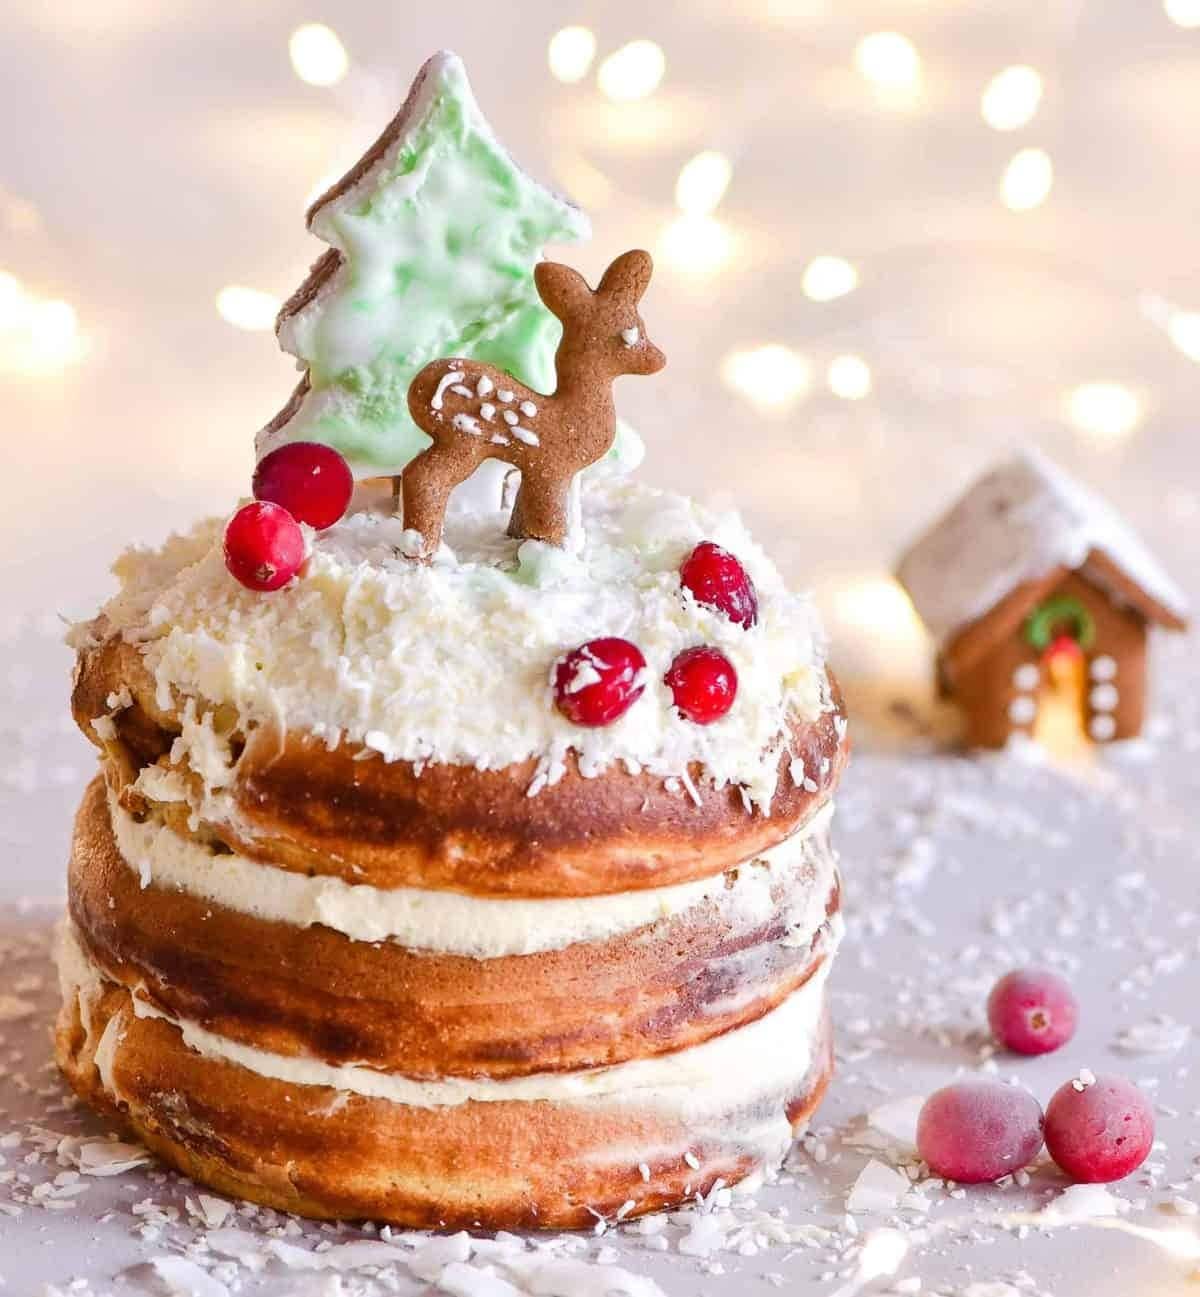 Stack of thick Gingerbread pancakes with cream filling topped with cranberries and cookies.